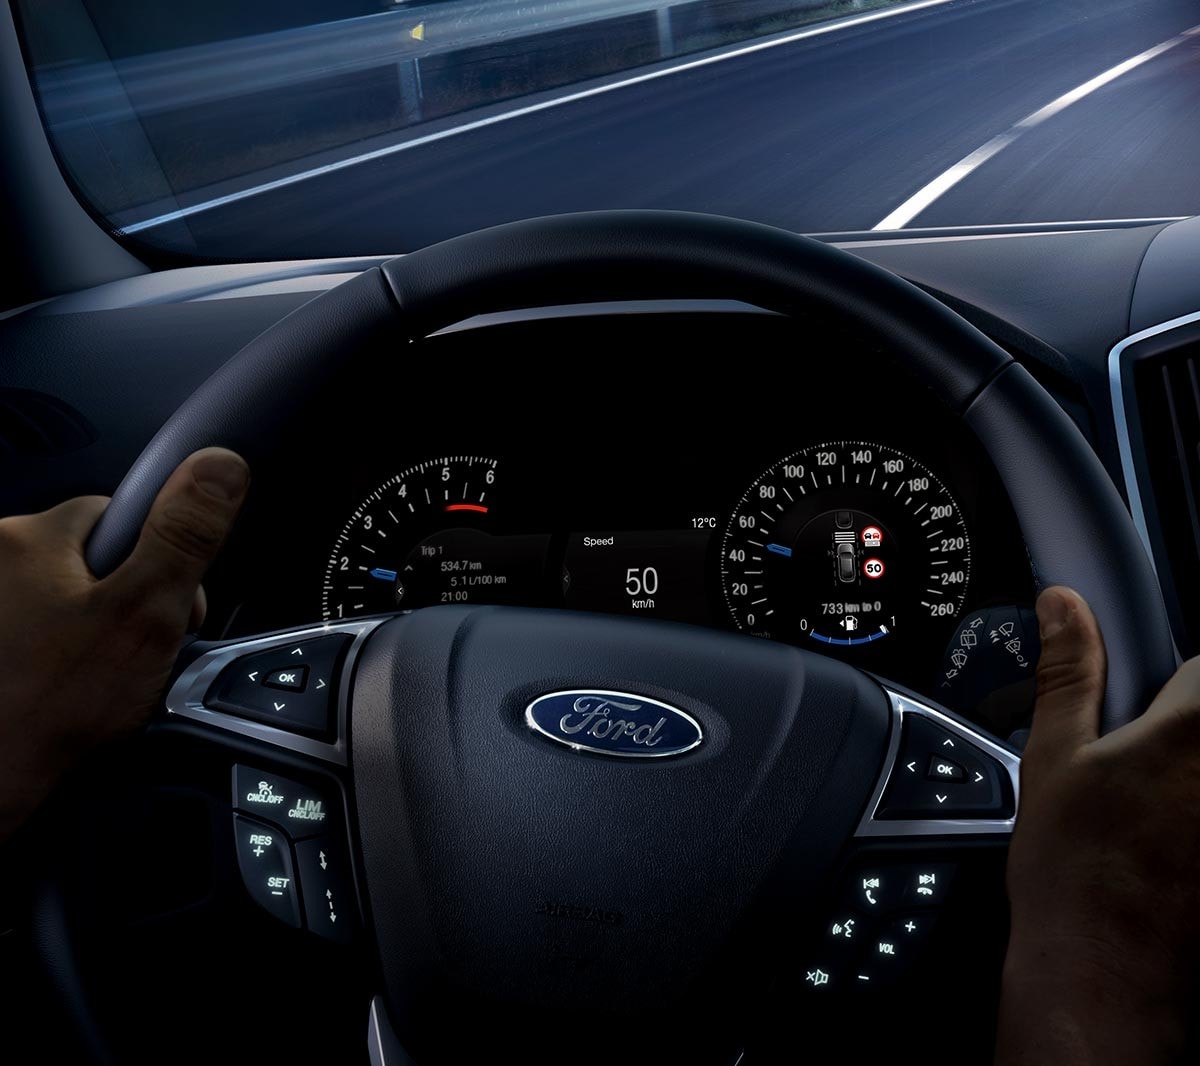 Ford Galaxy interior detail with focus on the dashboard and steering wheel